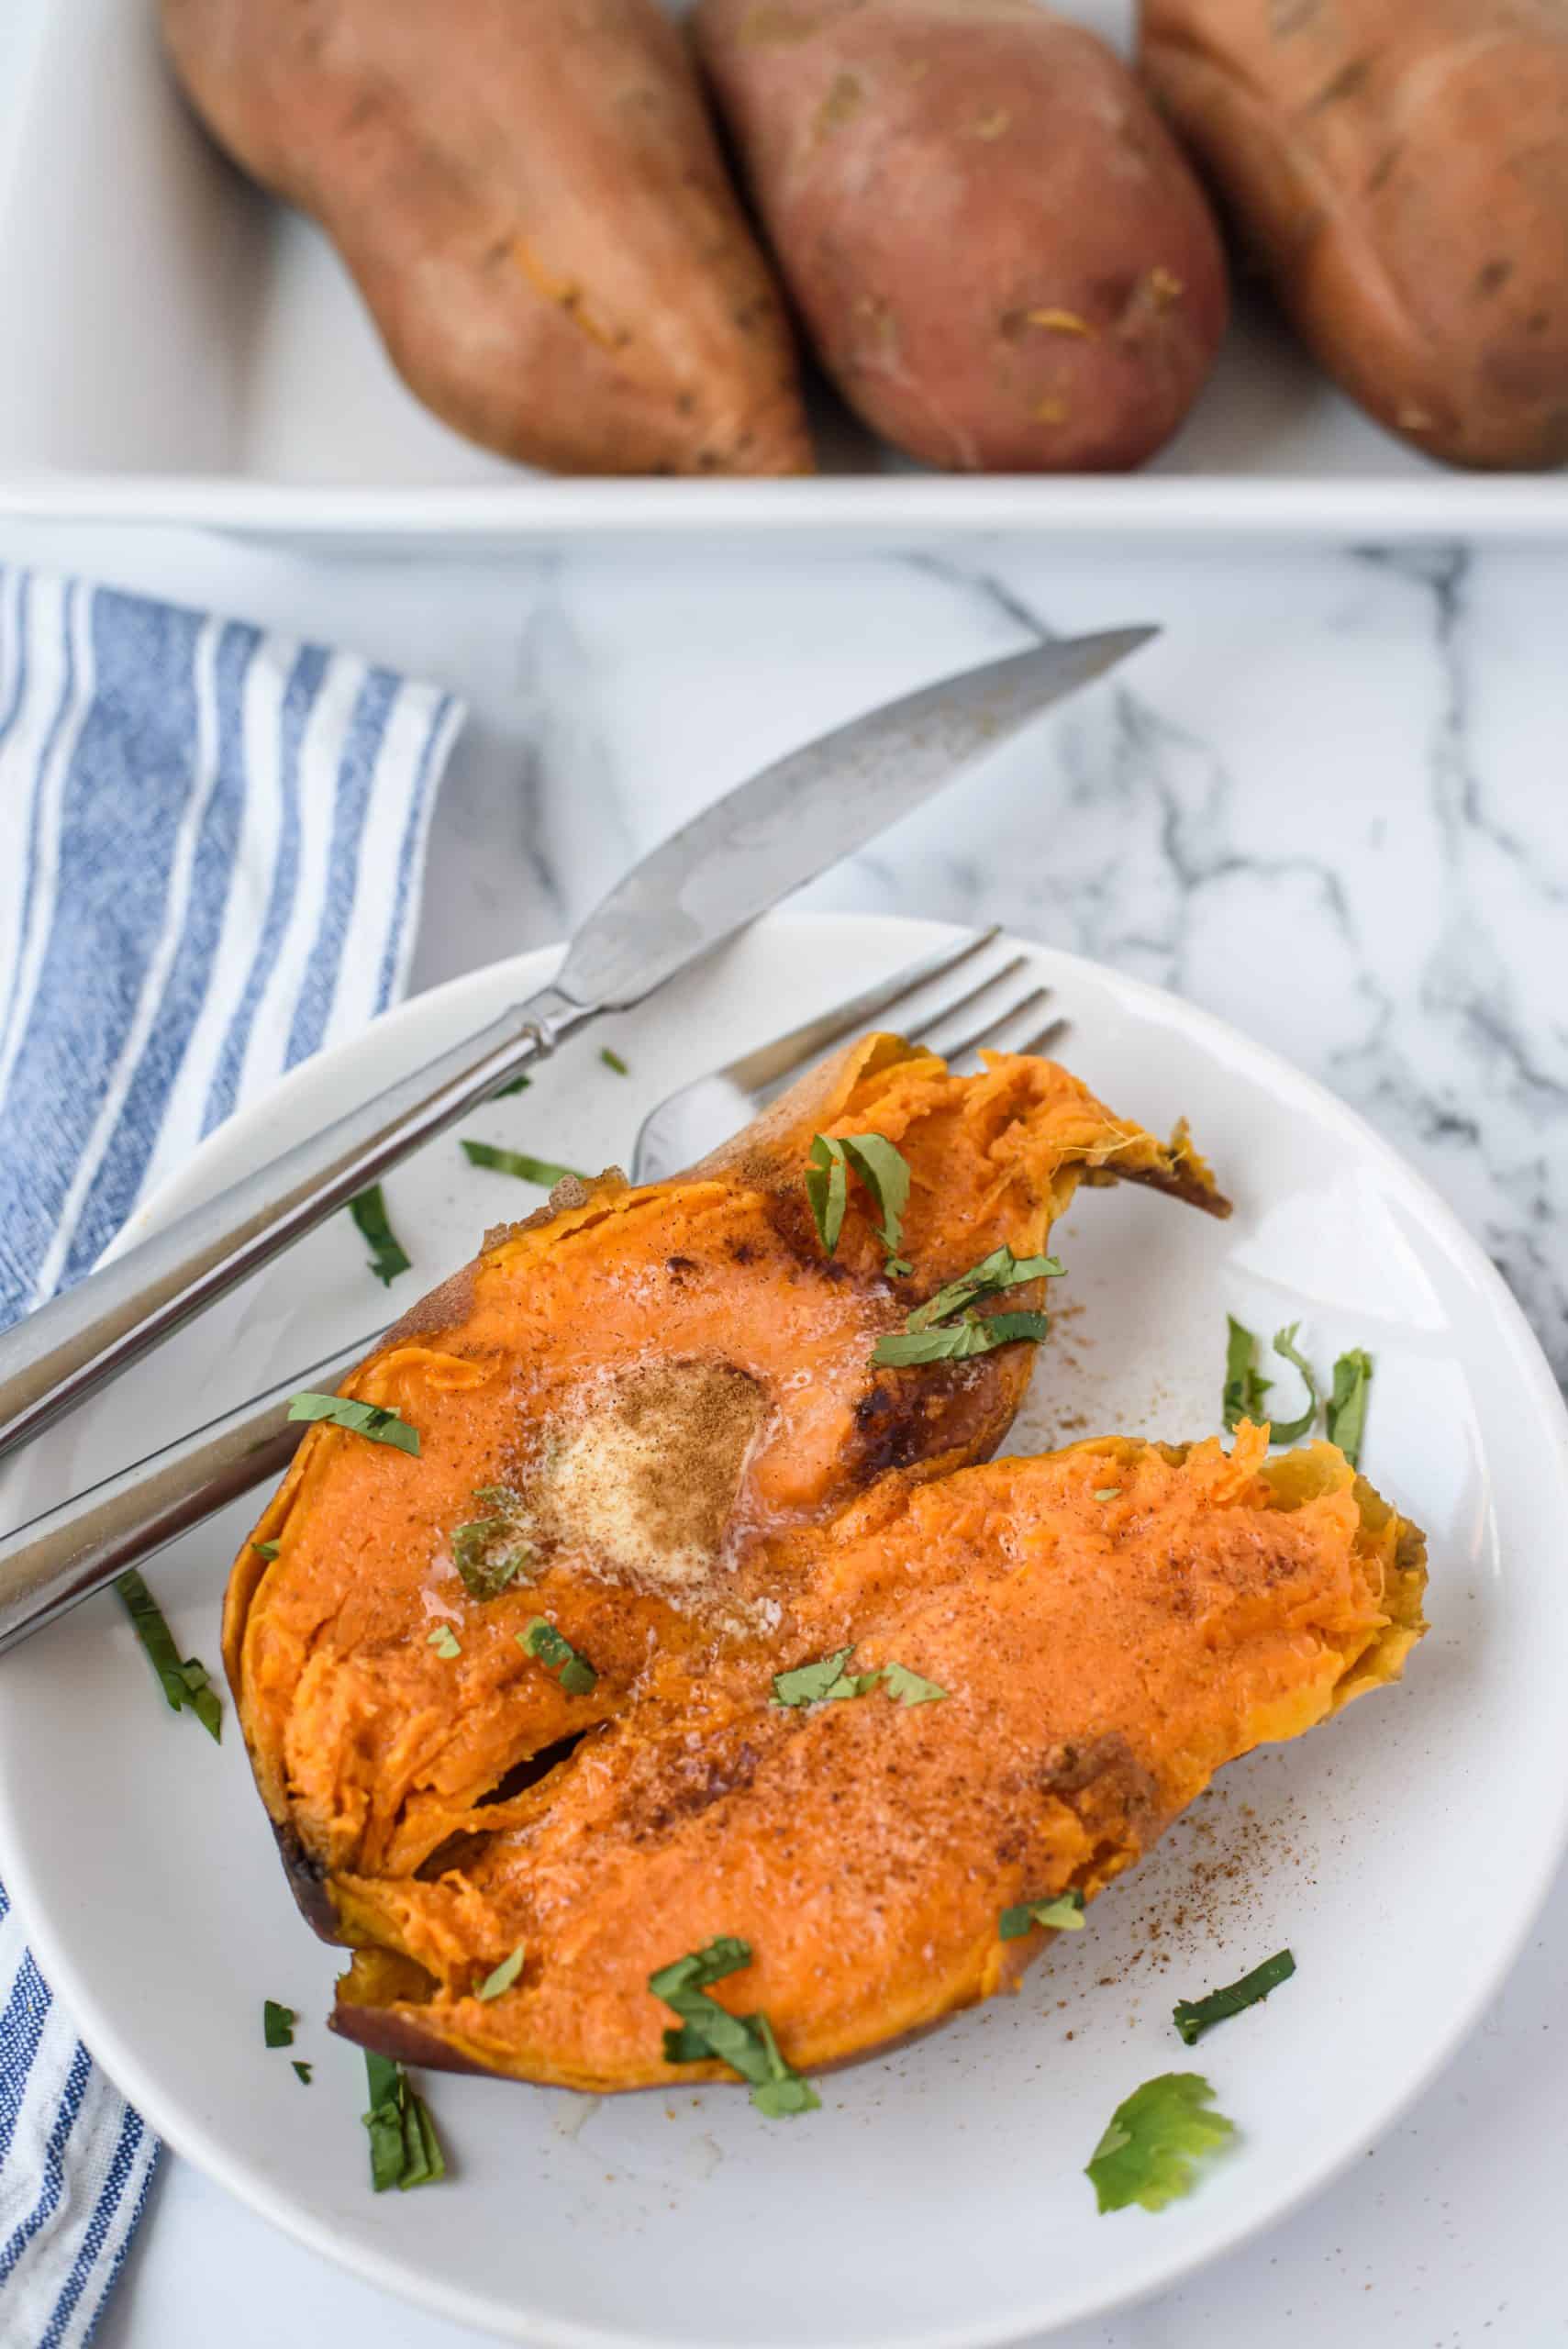 Learn how to make easy and delicious Sweet Potatoes in the Instant Pot. Creamy and perfect, and better than oven baked sweet potatoes!